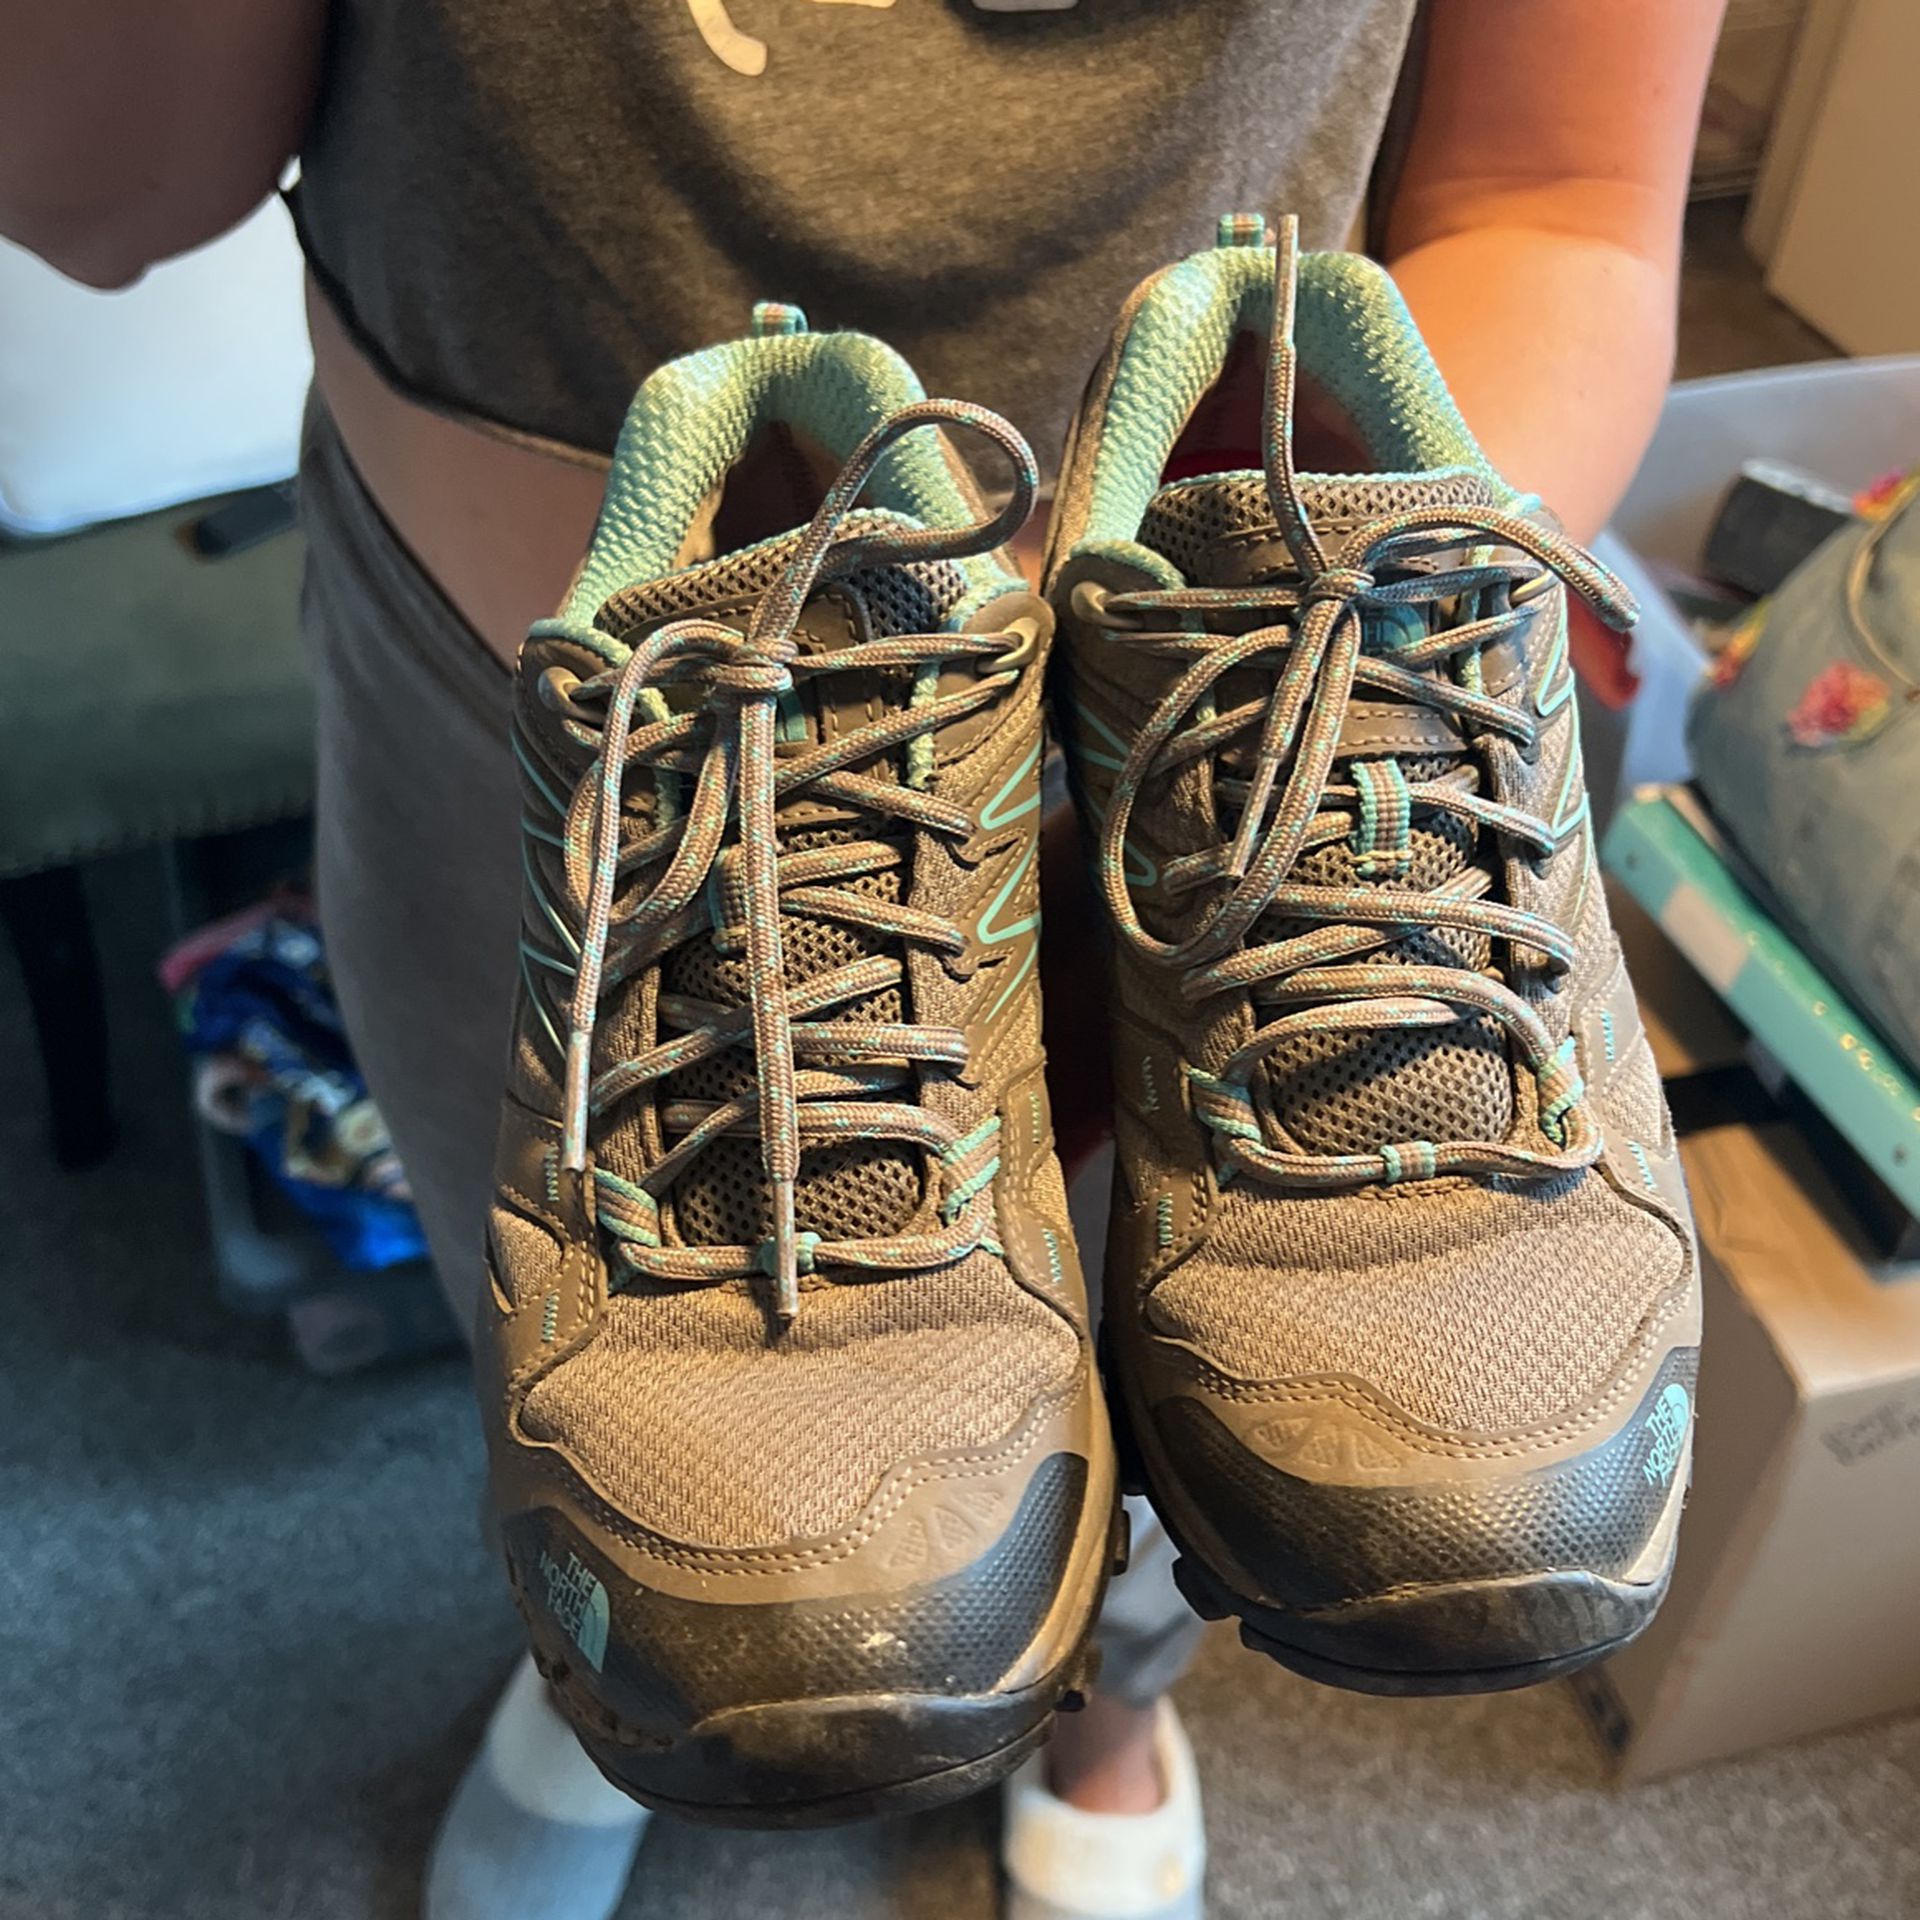 North Face Women’s Hiking Boots 8.5